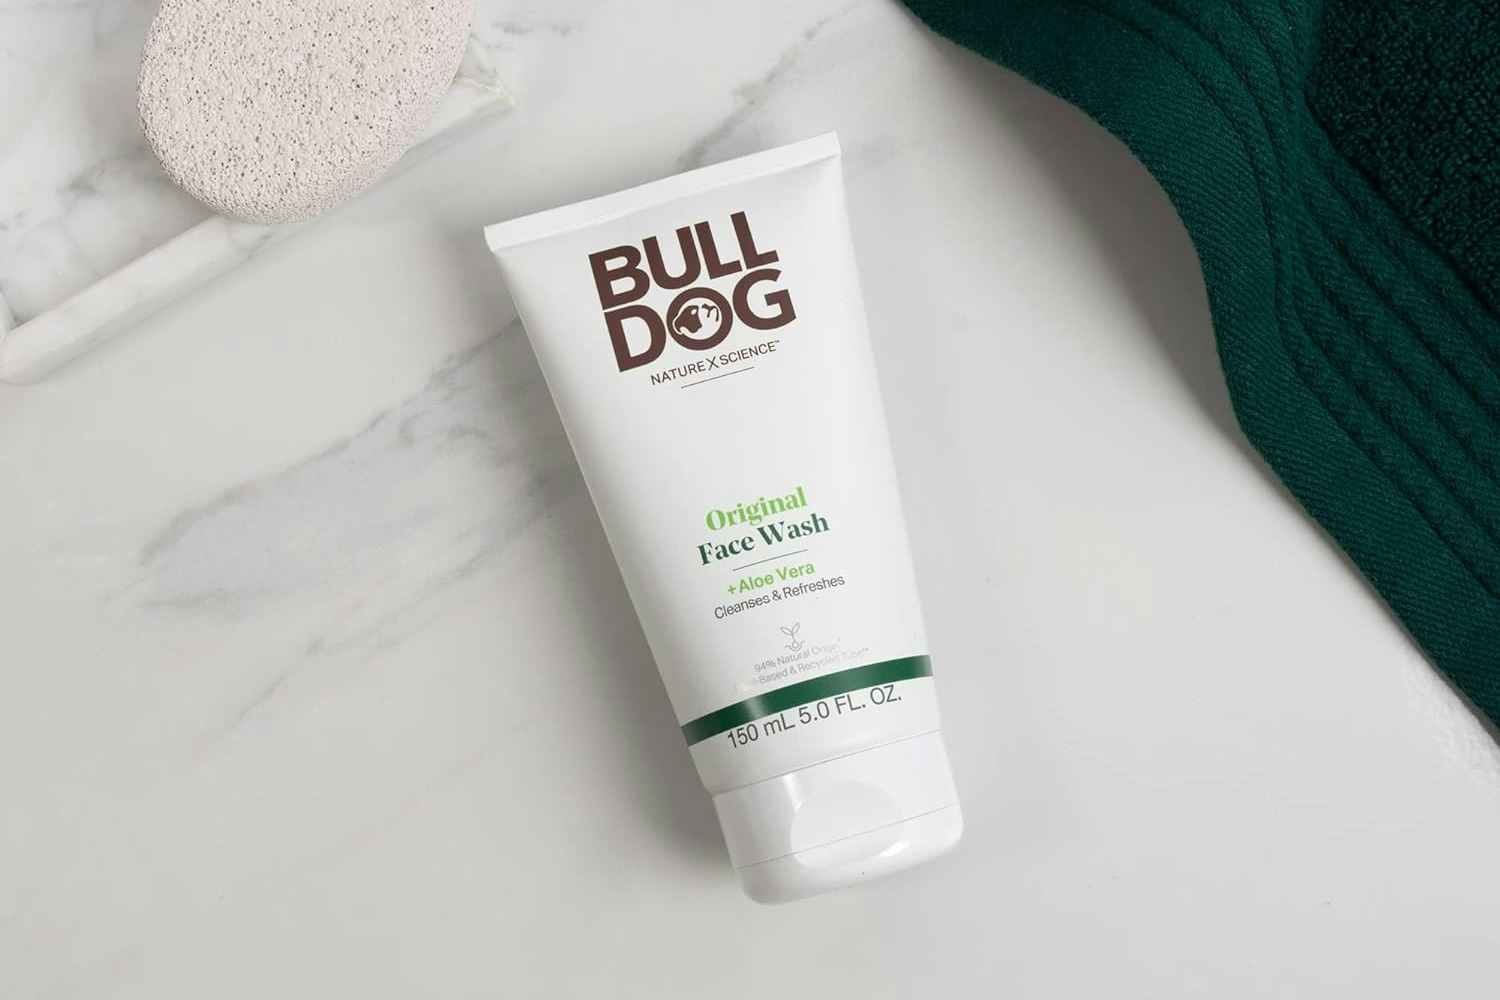 Bulldog Face Wash, as Low as $1.94 on Amazon